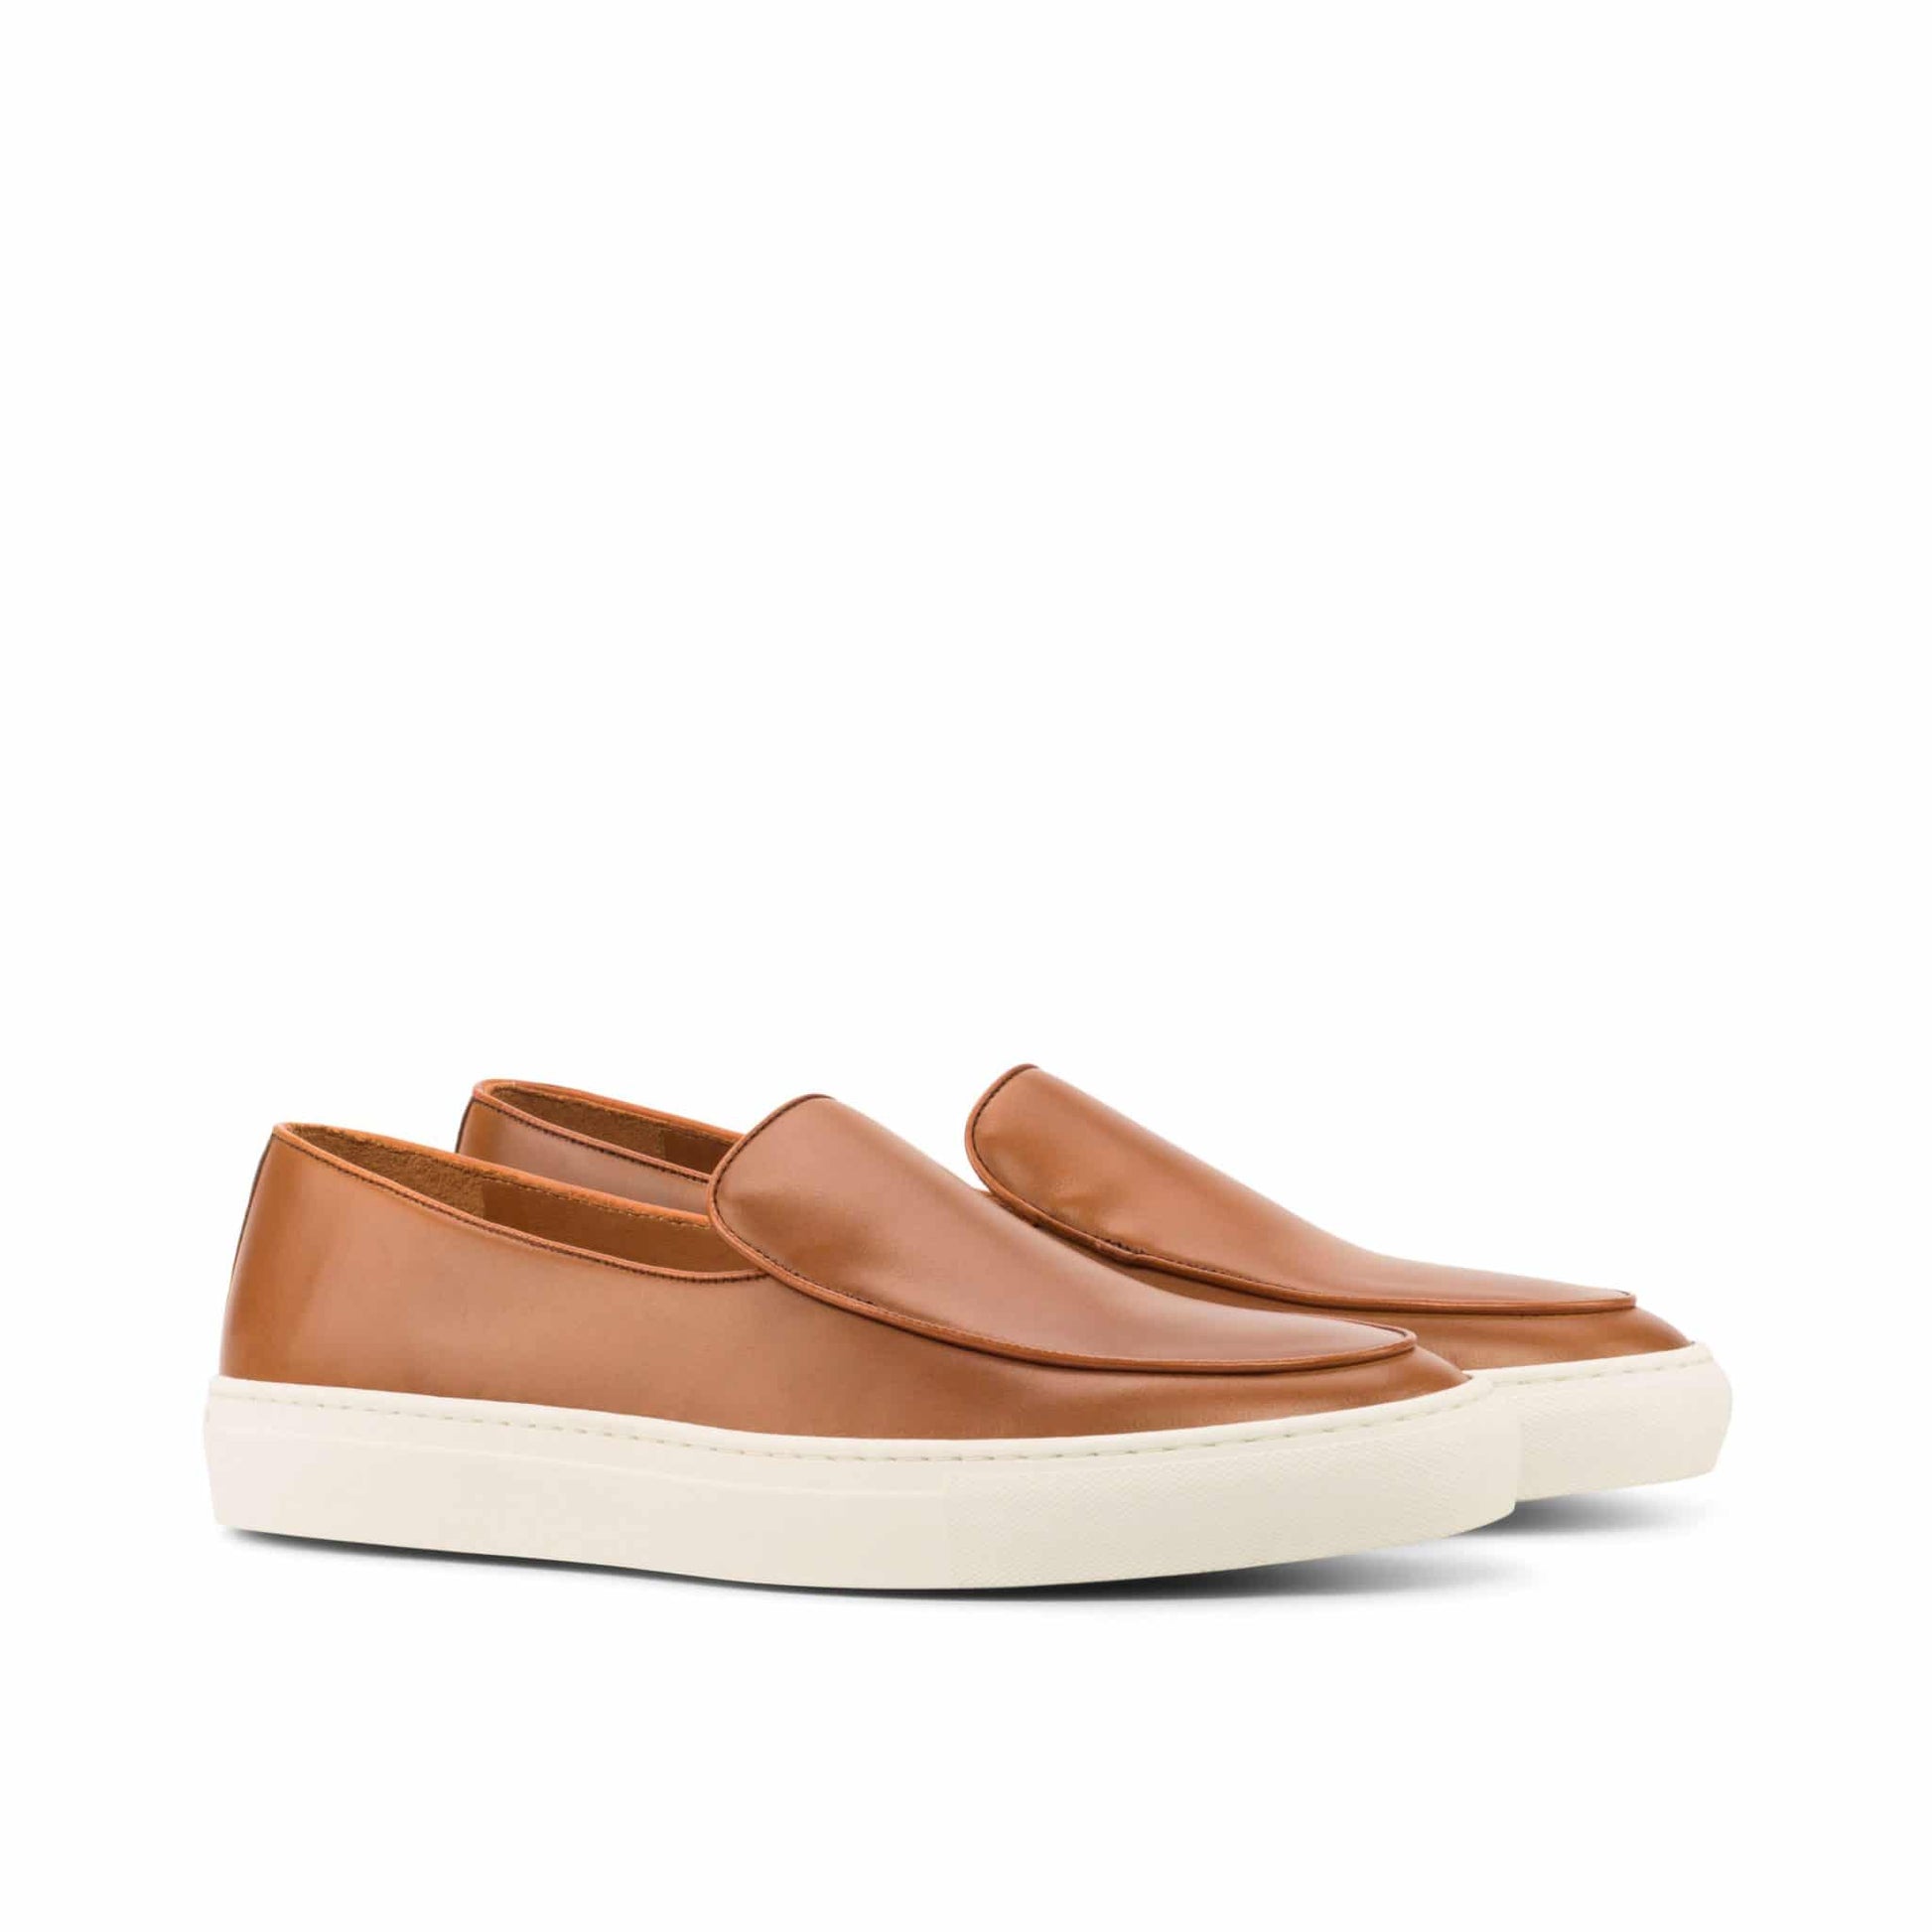 Tan Leather Slip On Loafer Sneaker for Men. White Comfortable Cup Sole.